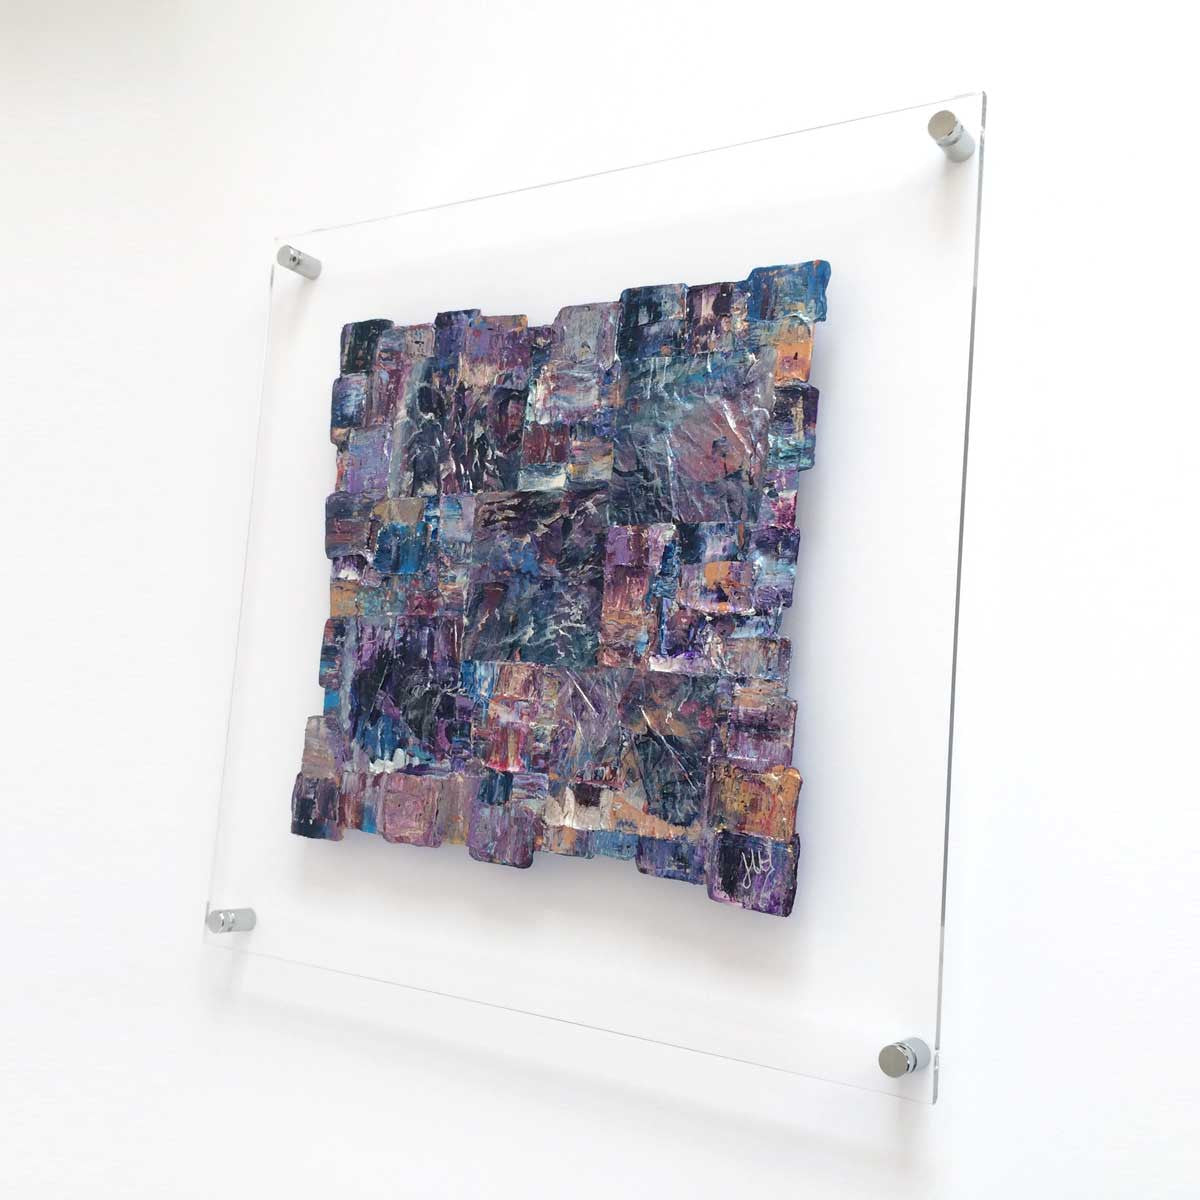 'Interwoven XIII' square painting on clear plexiglass